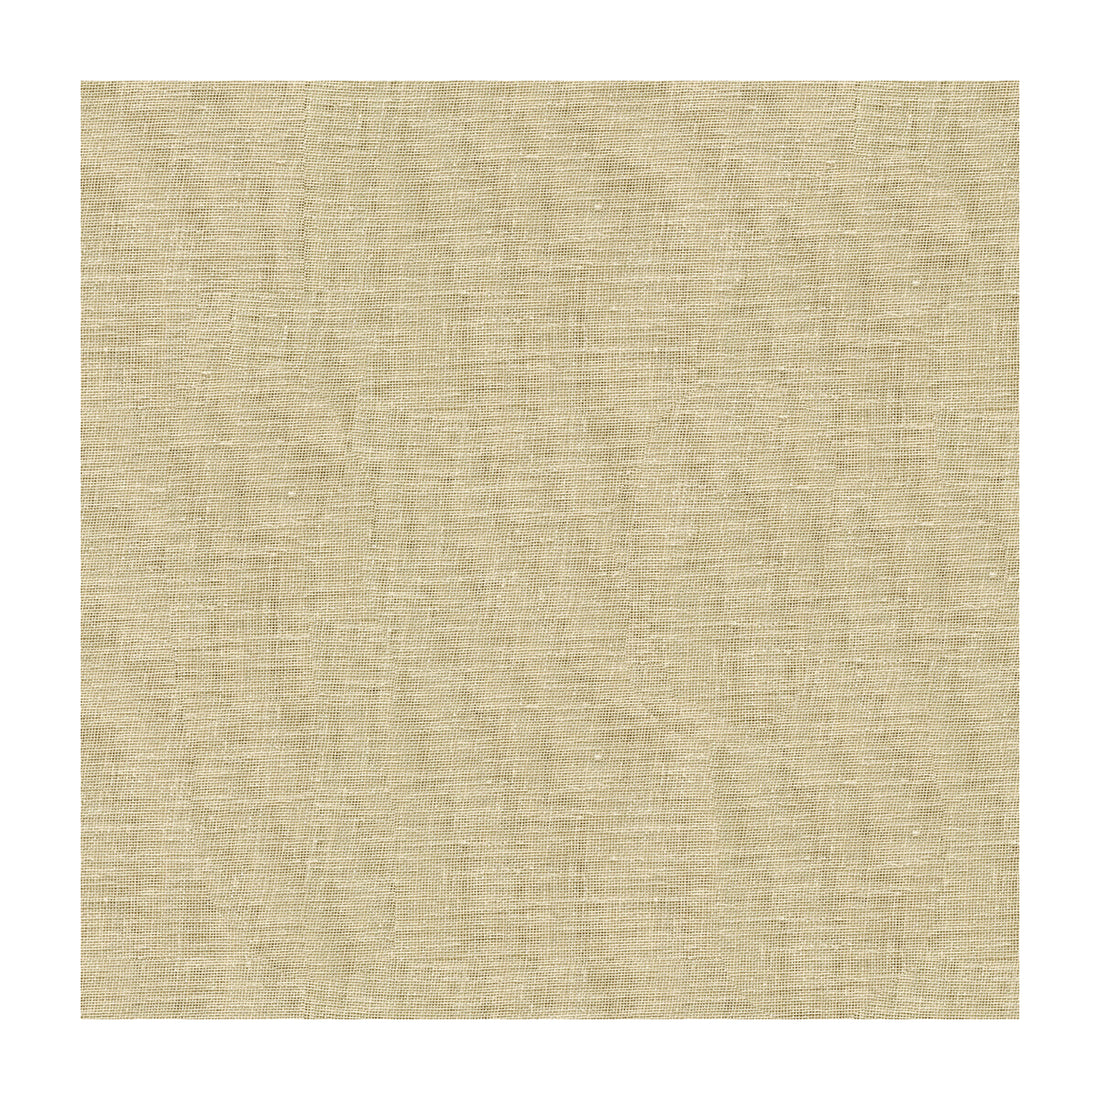 Kravet Contract fabric in 4166-1116 color - pattern 4166.1116.0 - by Kravet Contract